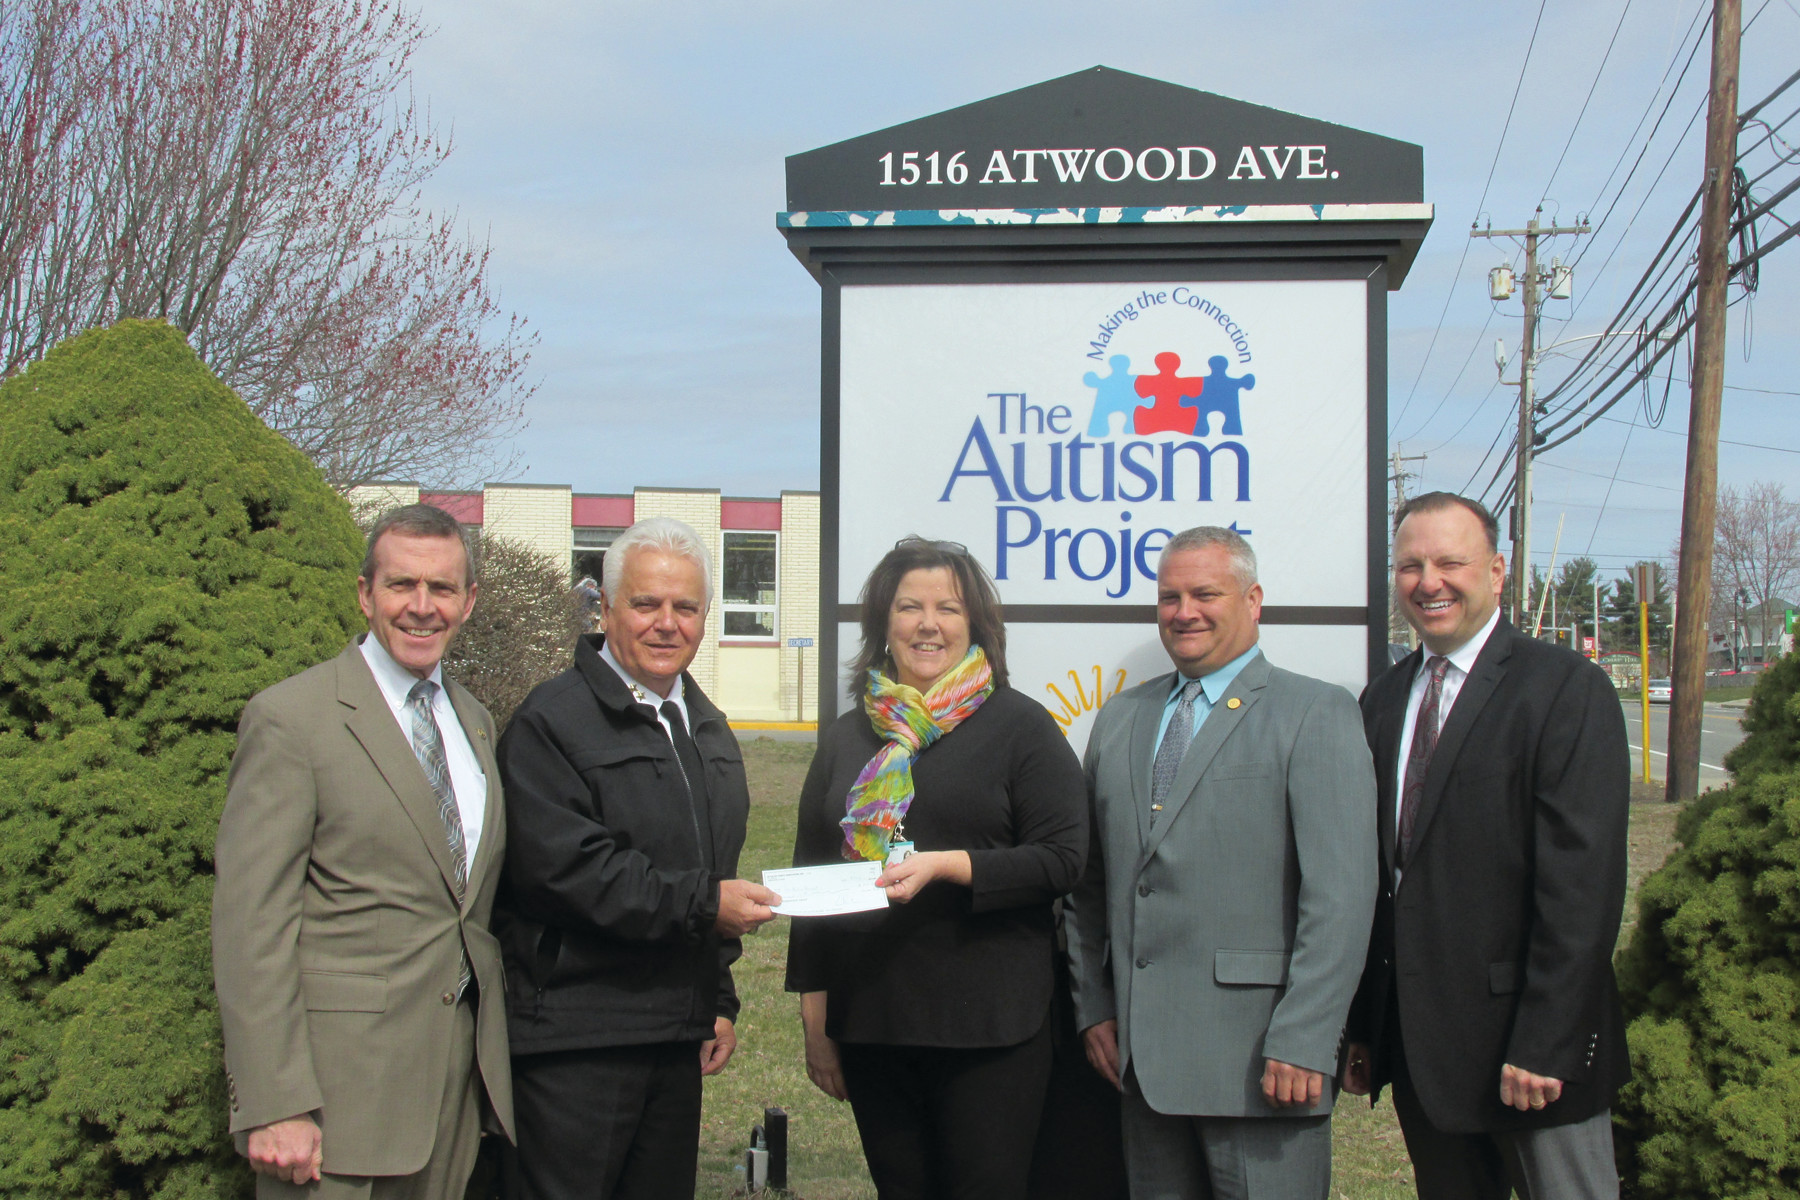 GIFT GIVERS: Johnston Police Chief Richard S. Tamburini presents a $1,000 check to Joanne Quinn, executive director of The Autism Project. He is joined by U.S. Marshal Jamie Hainsworth, Police Chiefs Association Executive Director Sid Wordell, and Johnston Deputy Chief Daniel O. Parrillo.